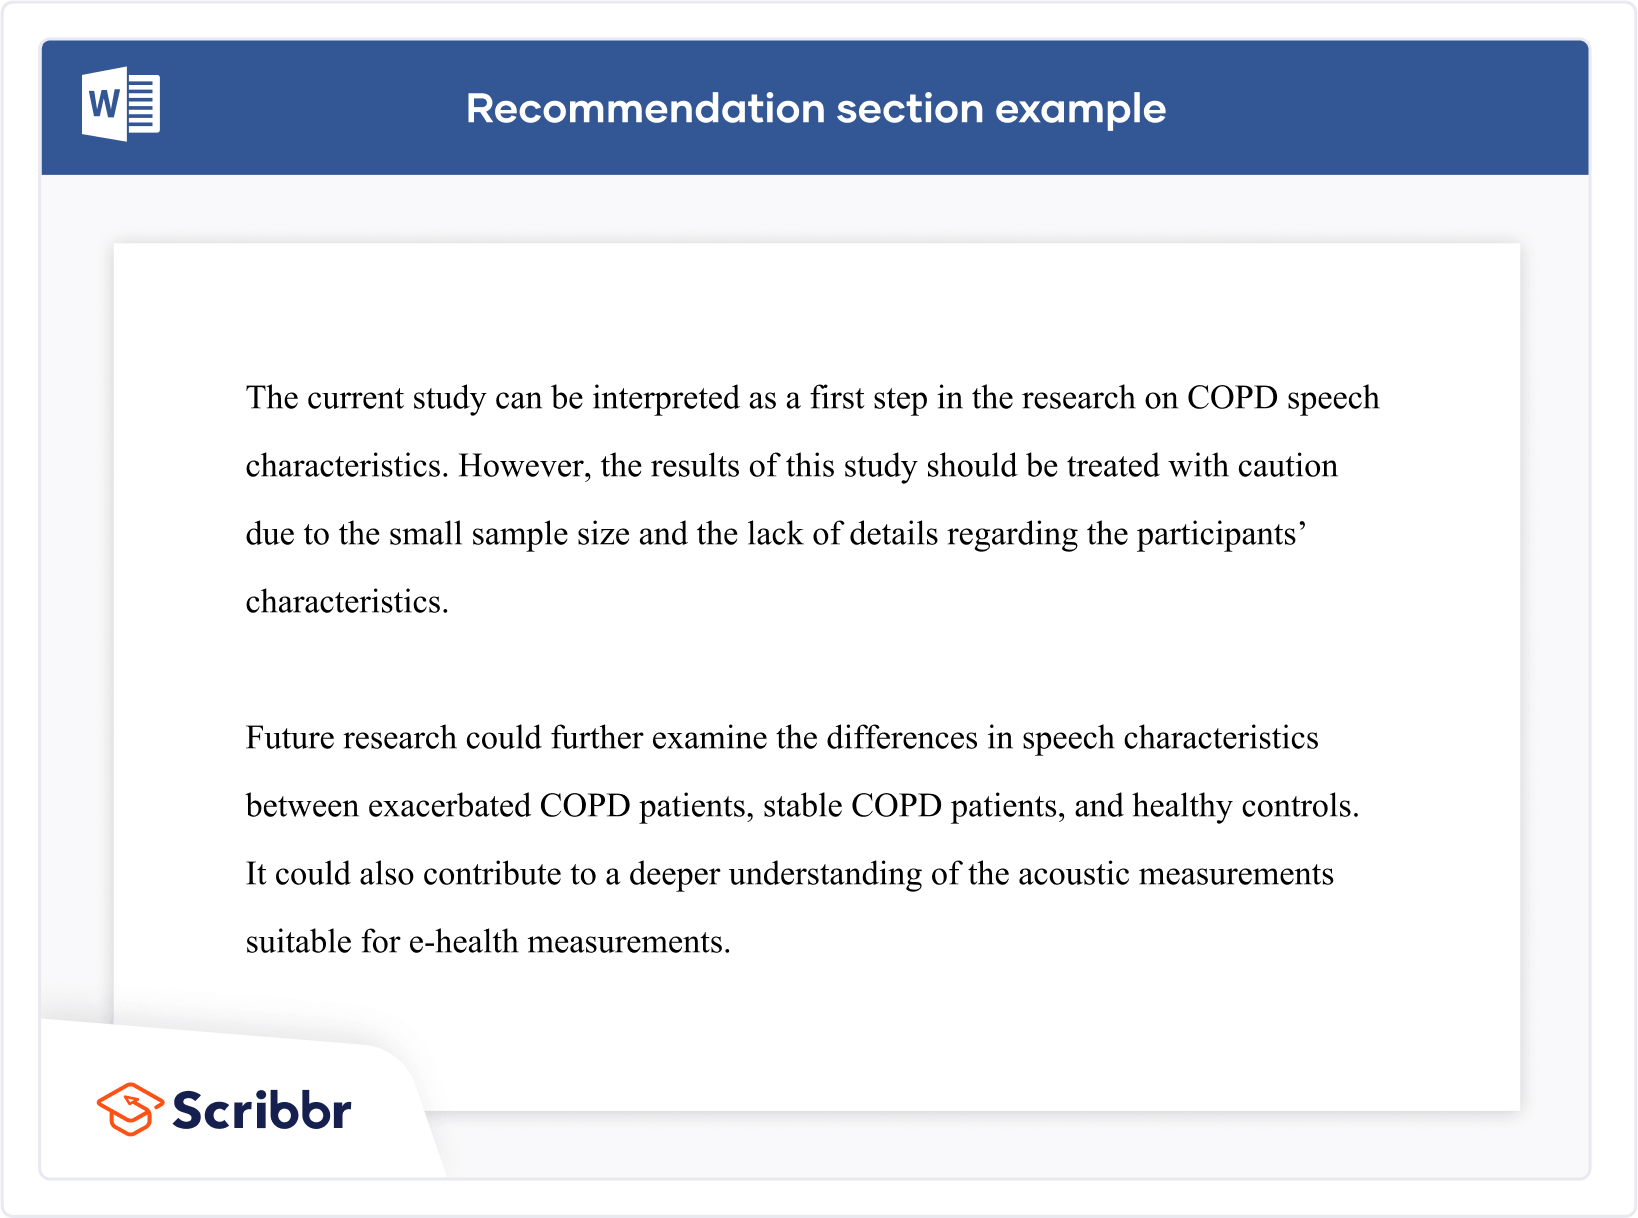 Recommendation in research example